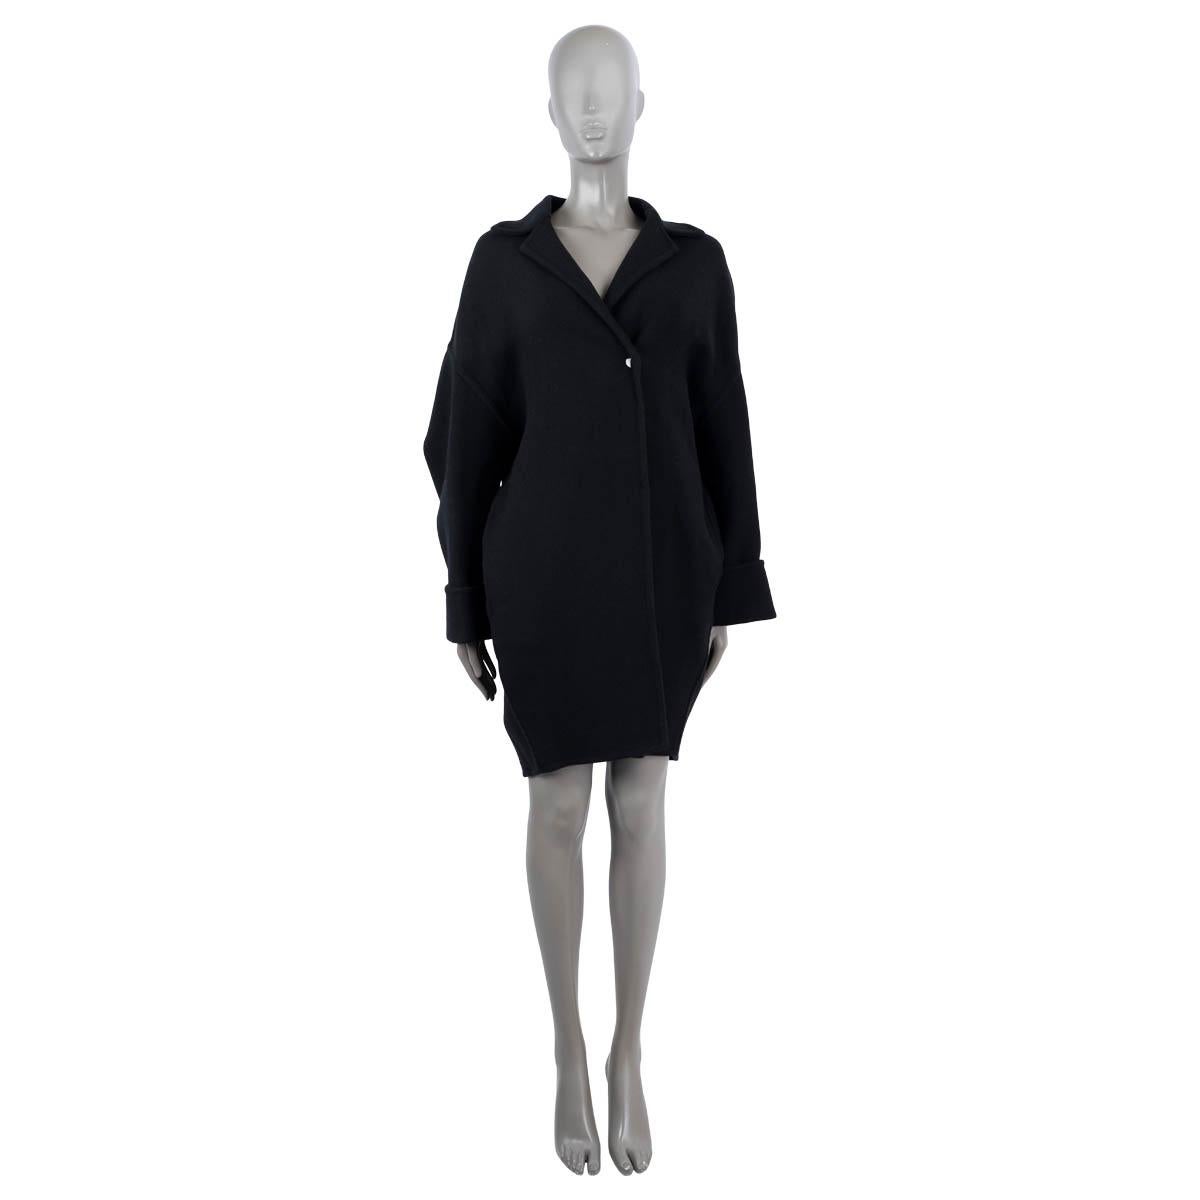 100% authentic Celine coat in black wool (57%), polyamide (18%) and elastane (2%). Features two slit pockets on the side and oversized balloon sleeves. Closes with a black push button. Unlined. Has been worn and is in excellent